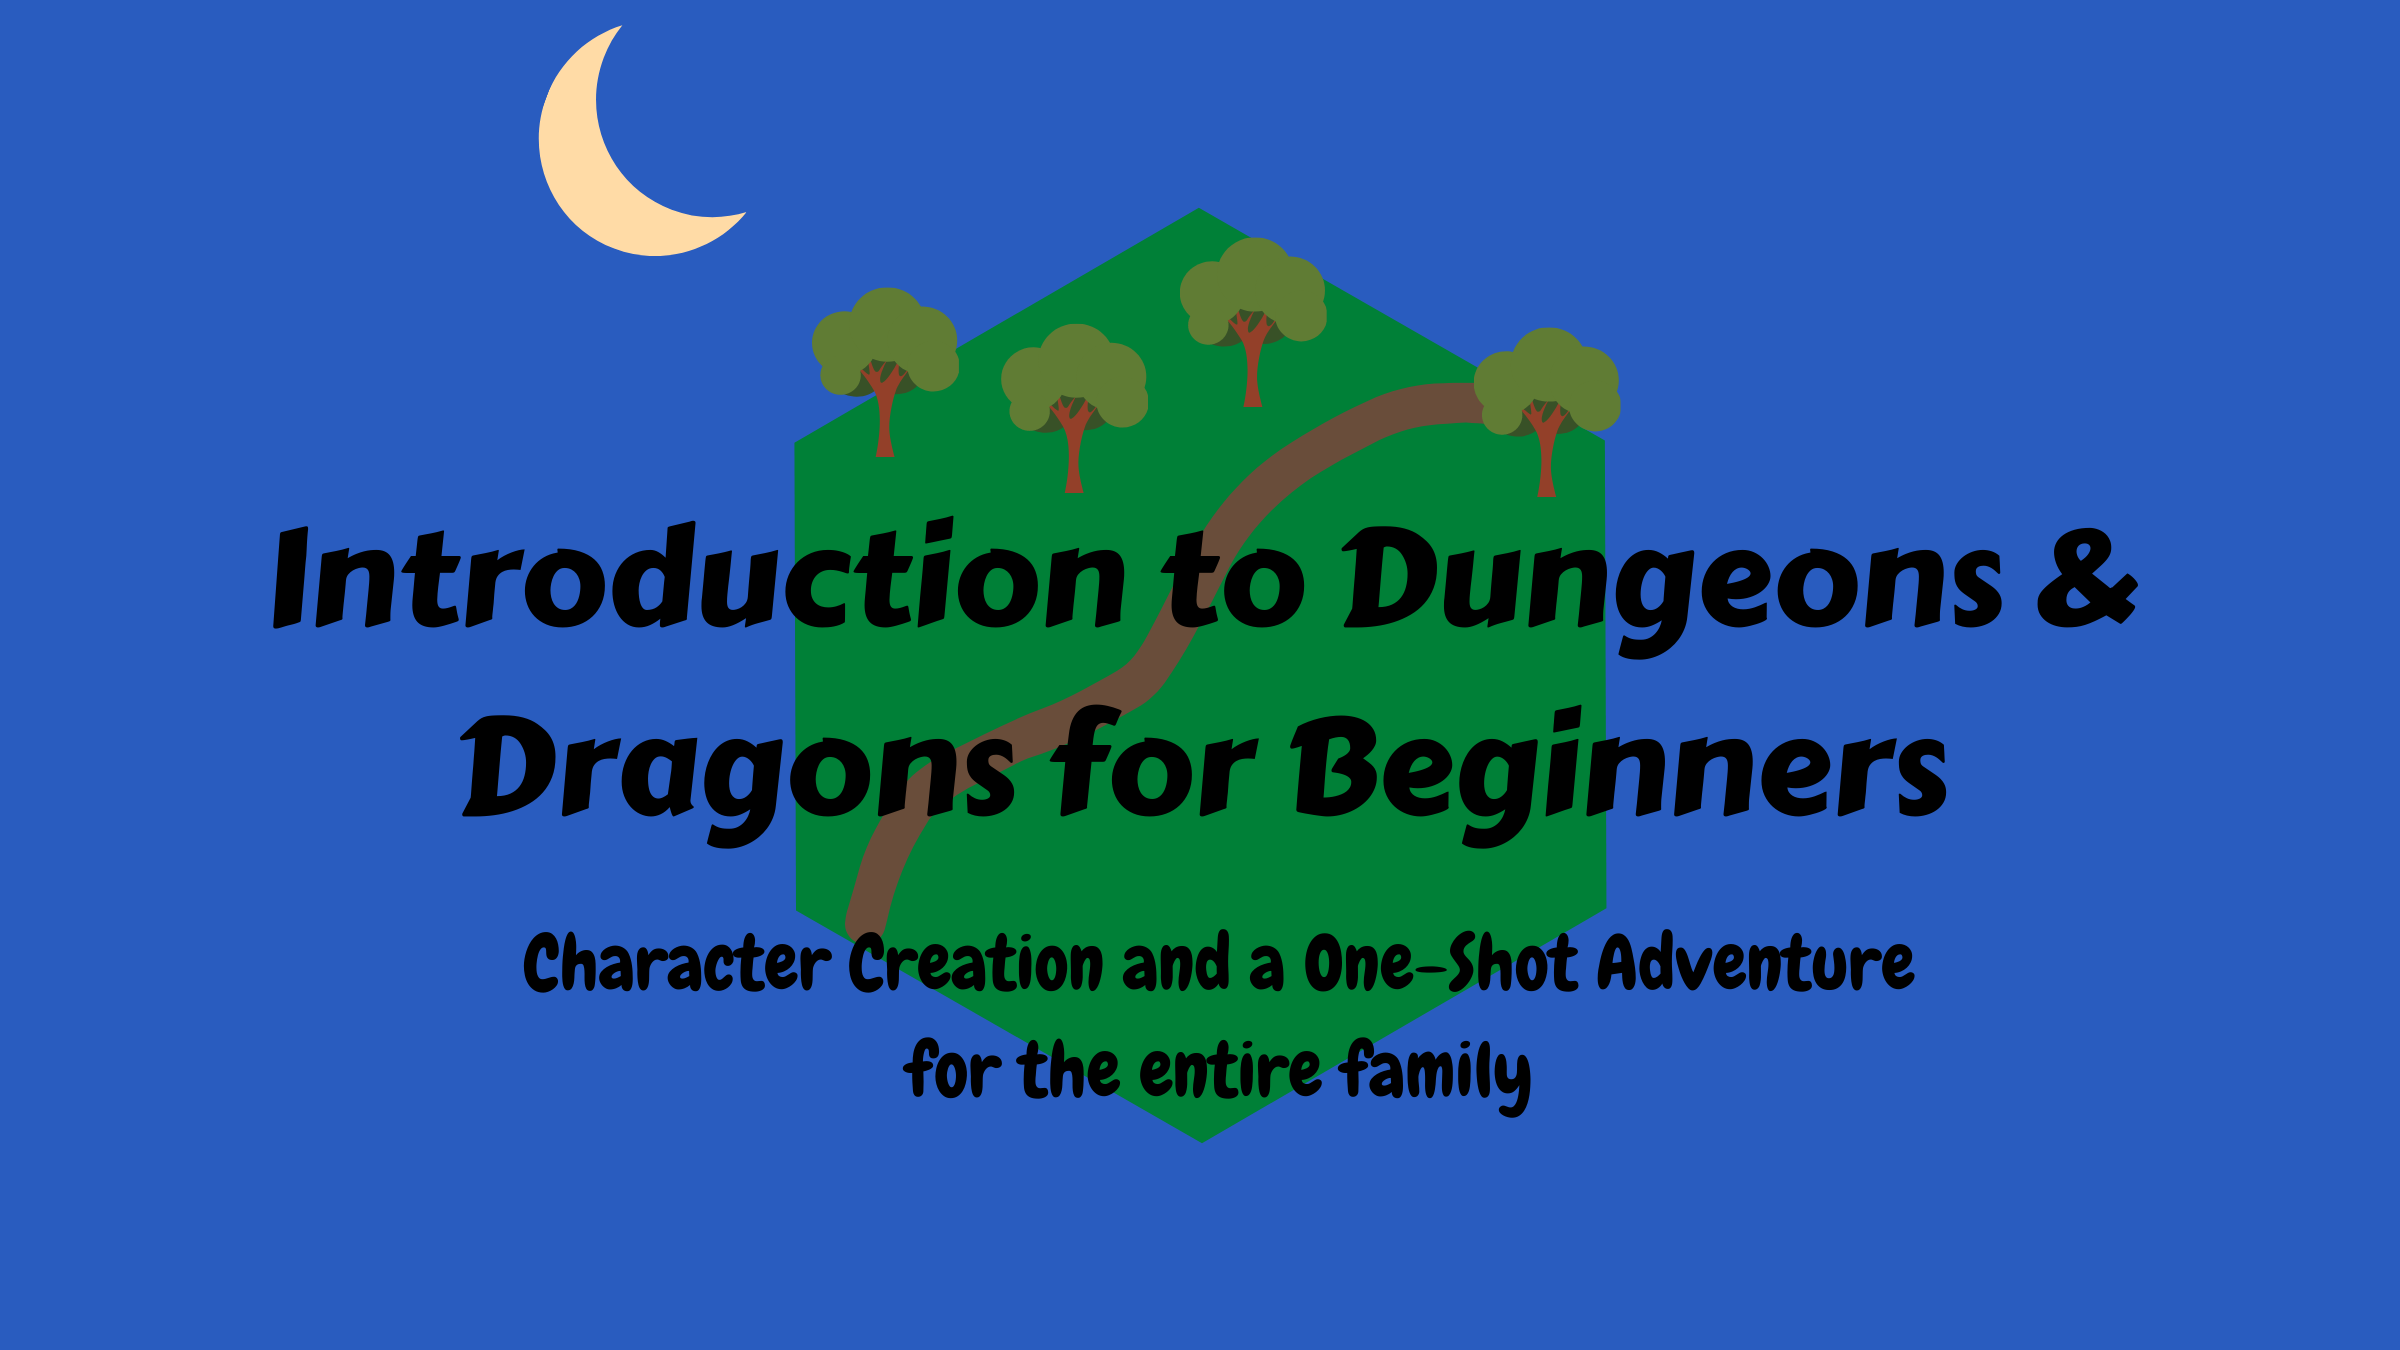 Character Creation and Adventure for a Beginner Player (A Game for the Whole Family)